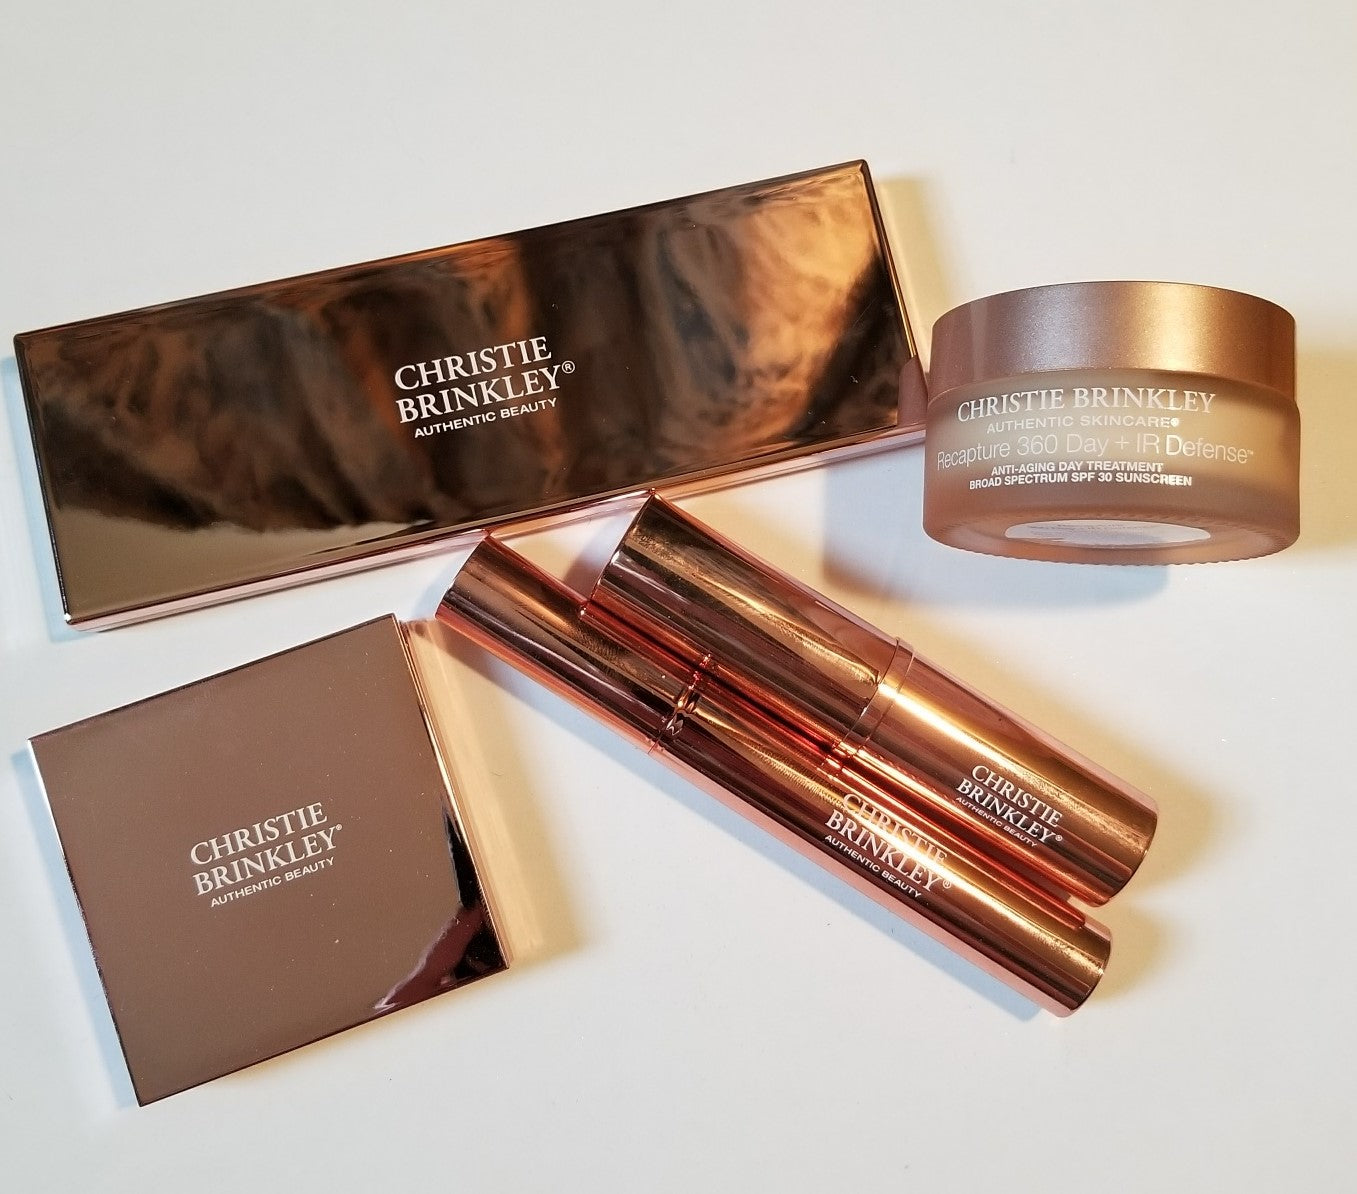 Review, Swatches, Makeup Trends 2018, 2019, 2020: Christie Brinkley Sheer Powder Bronzer, Natural Glow Stick Highlighter, Day to Night Eyeshadow Palette, Mascara, Enhanced Anti-Aging Day Cream with SPF 30